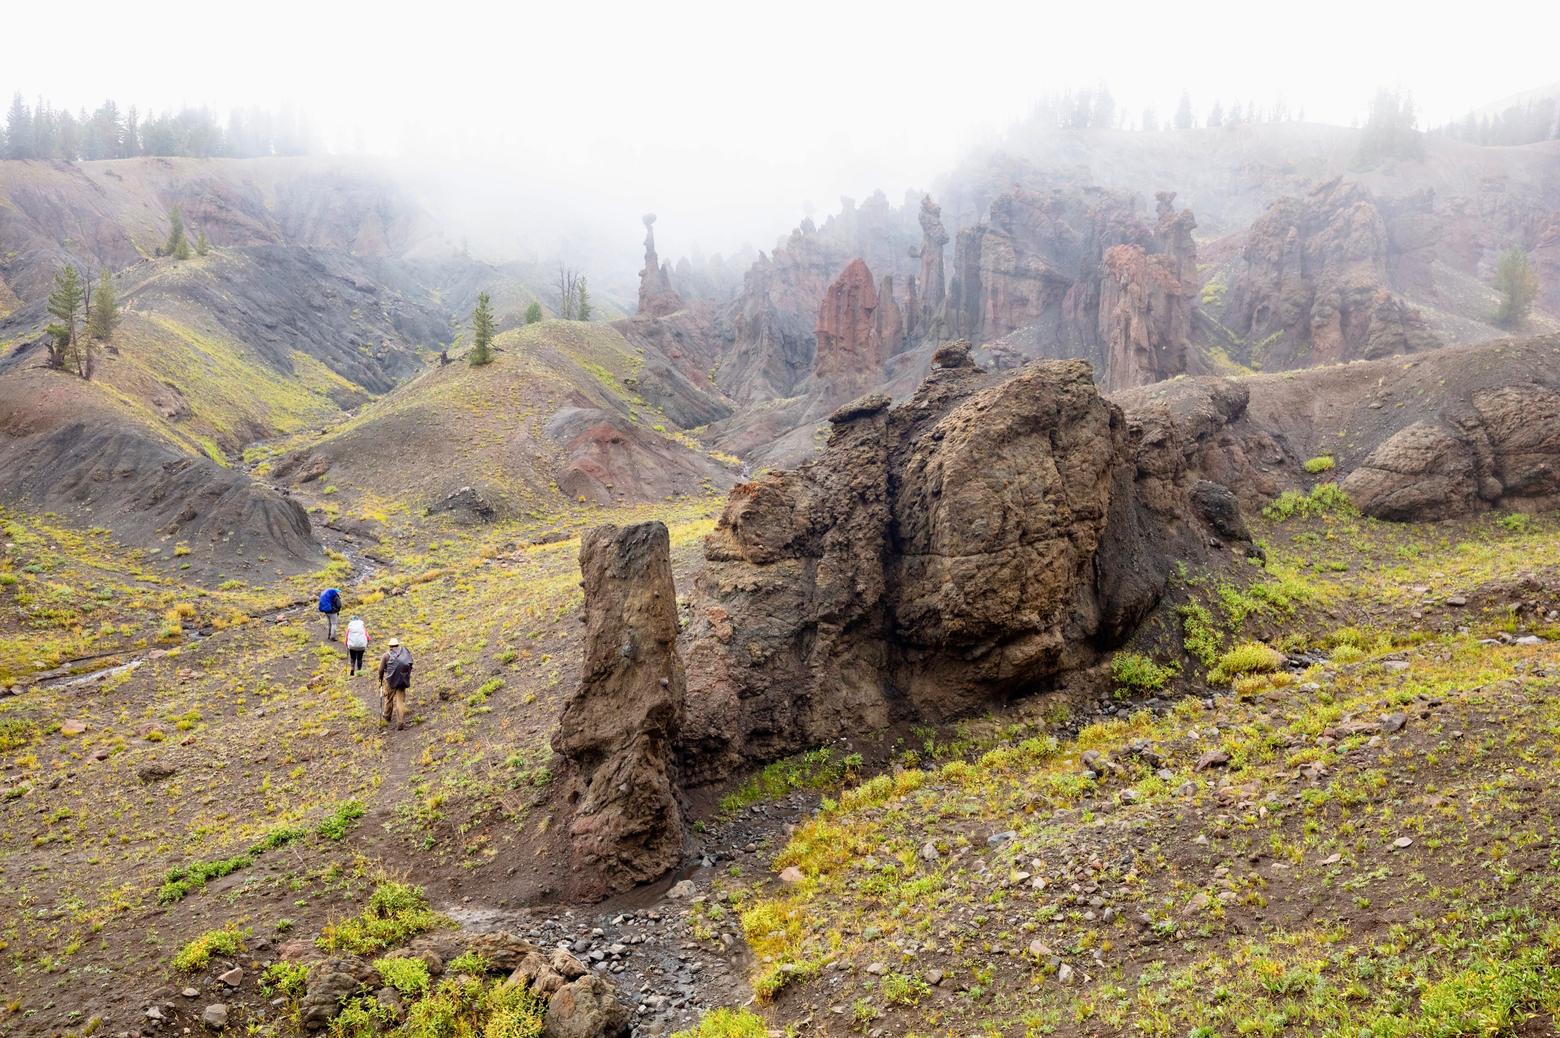 Hikers on a misty day move through Yellowstone's Hoodoo Basin. As nature writer and former wilderness specialist with the US Forest Service Susan Marsh notes, science,  empiricism and reason can fall short of explaining what's really in front of  us. For example, centuries have had to pass since The Enlightenment before scientists acknowledged that non-humans have their own state of being. They can sense things we can't and yet we deny these things often because it makes destruction of nature easier. Photo by Jacob W. Frank/NPS